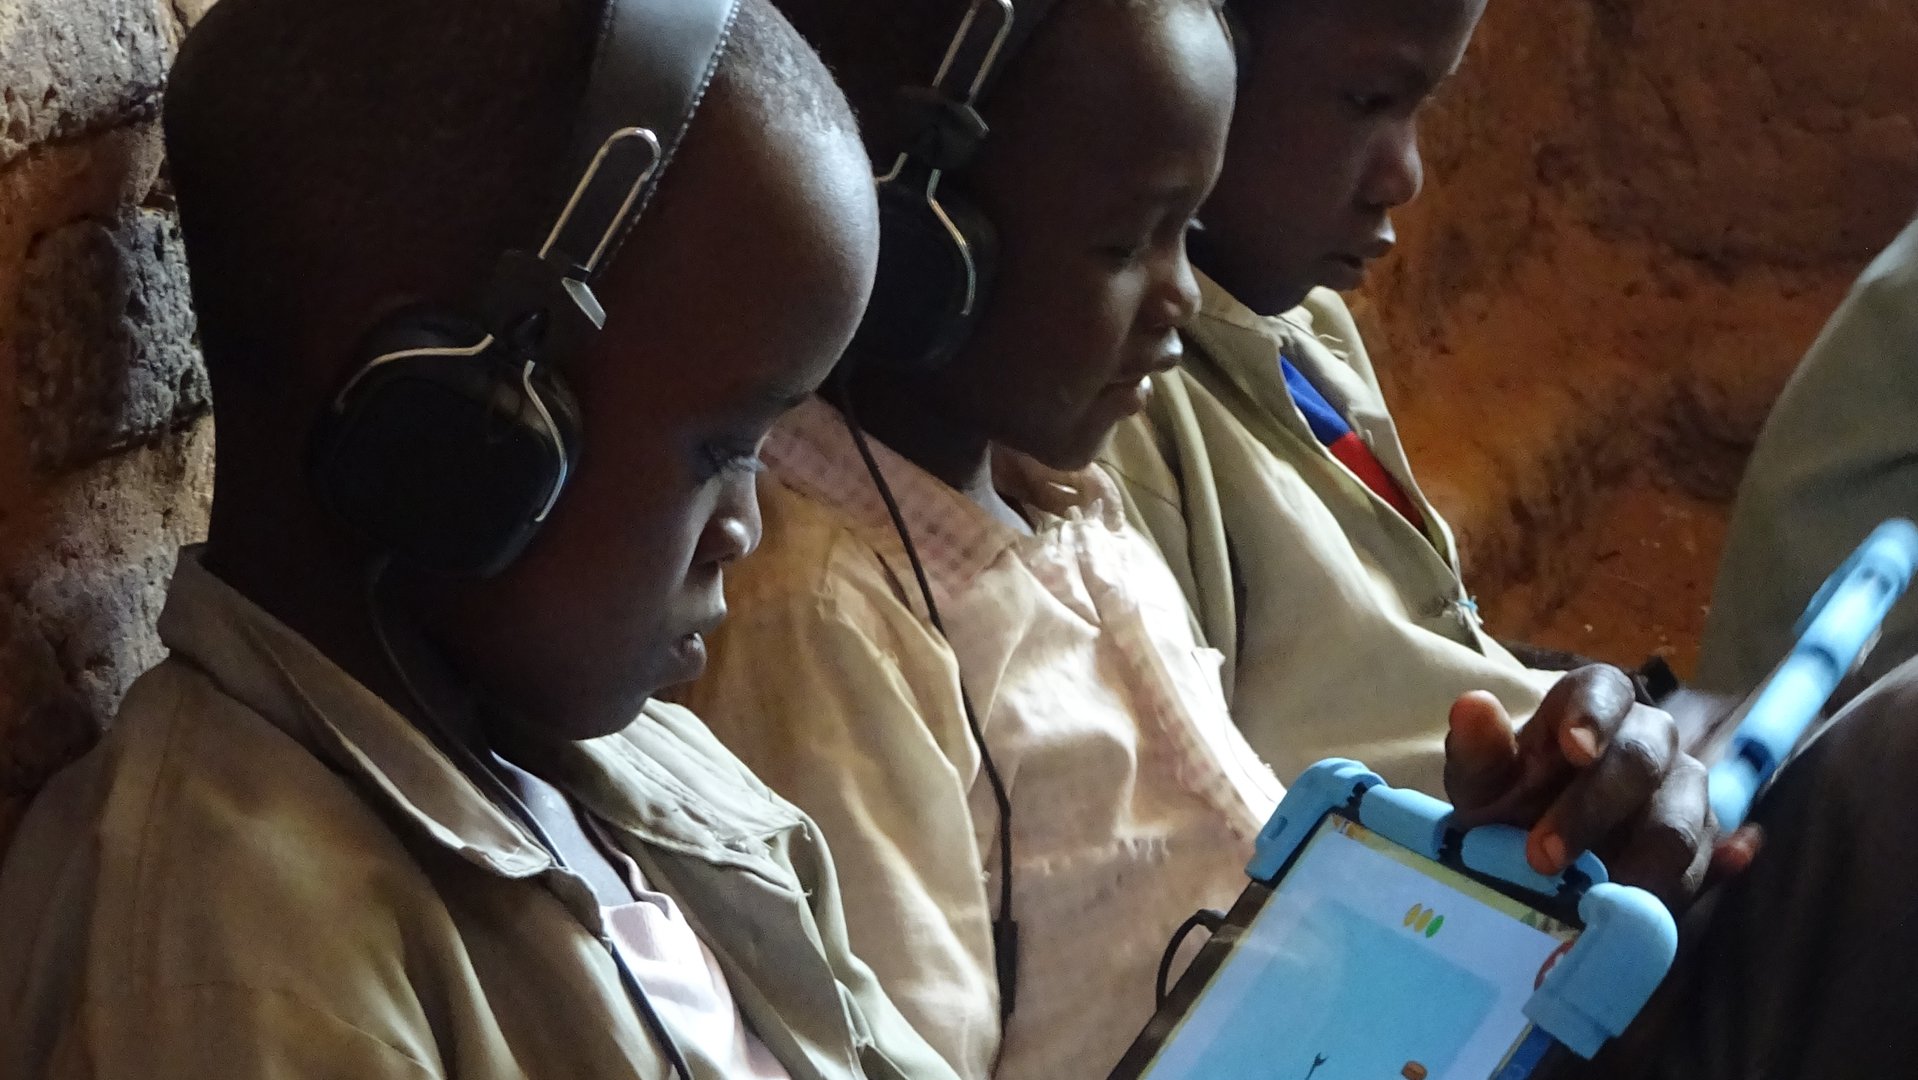 Children in South Sudan receive tablet education with Can't Wait to Learn from War Child